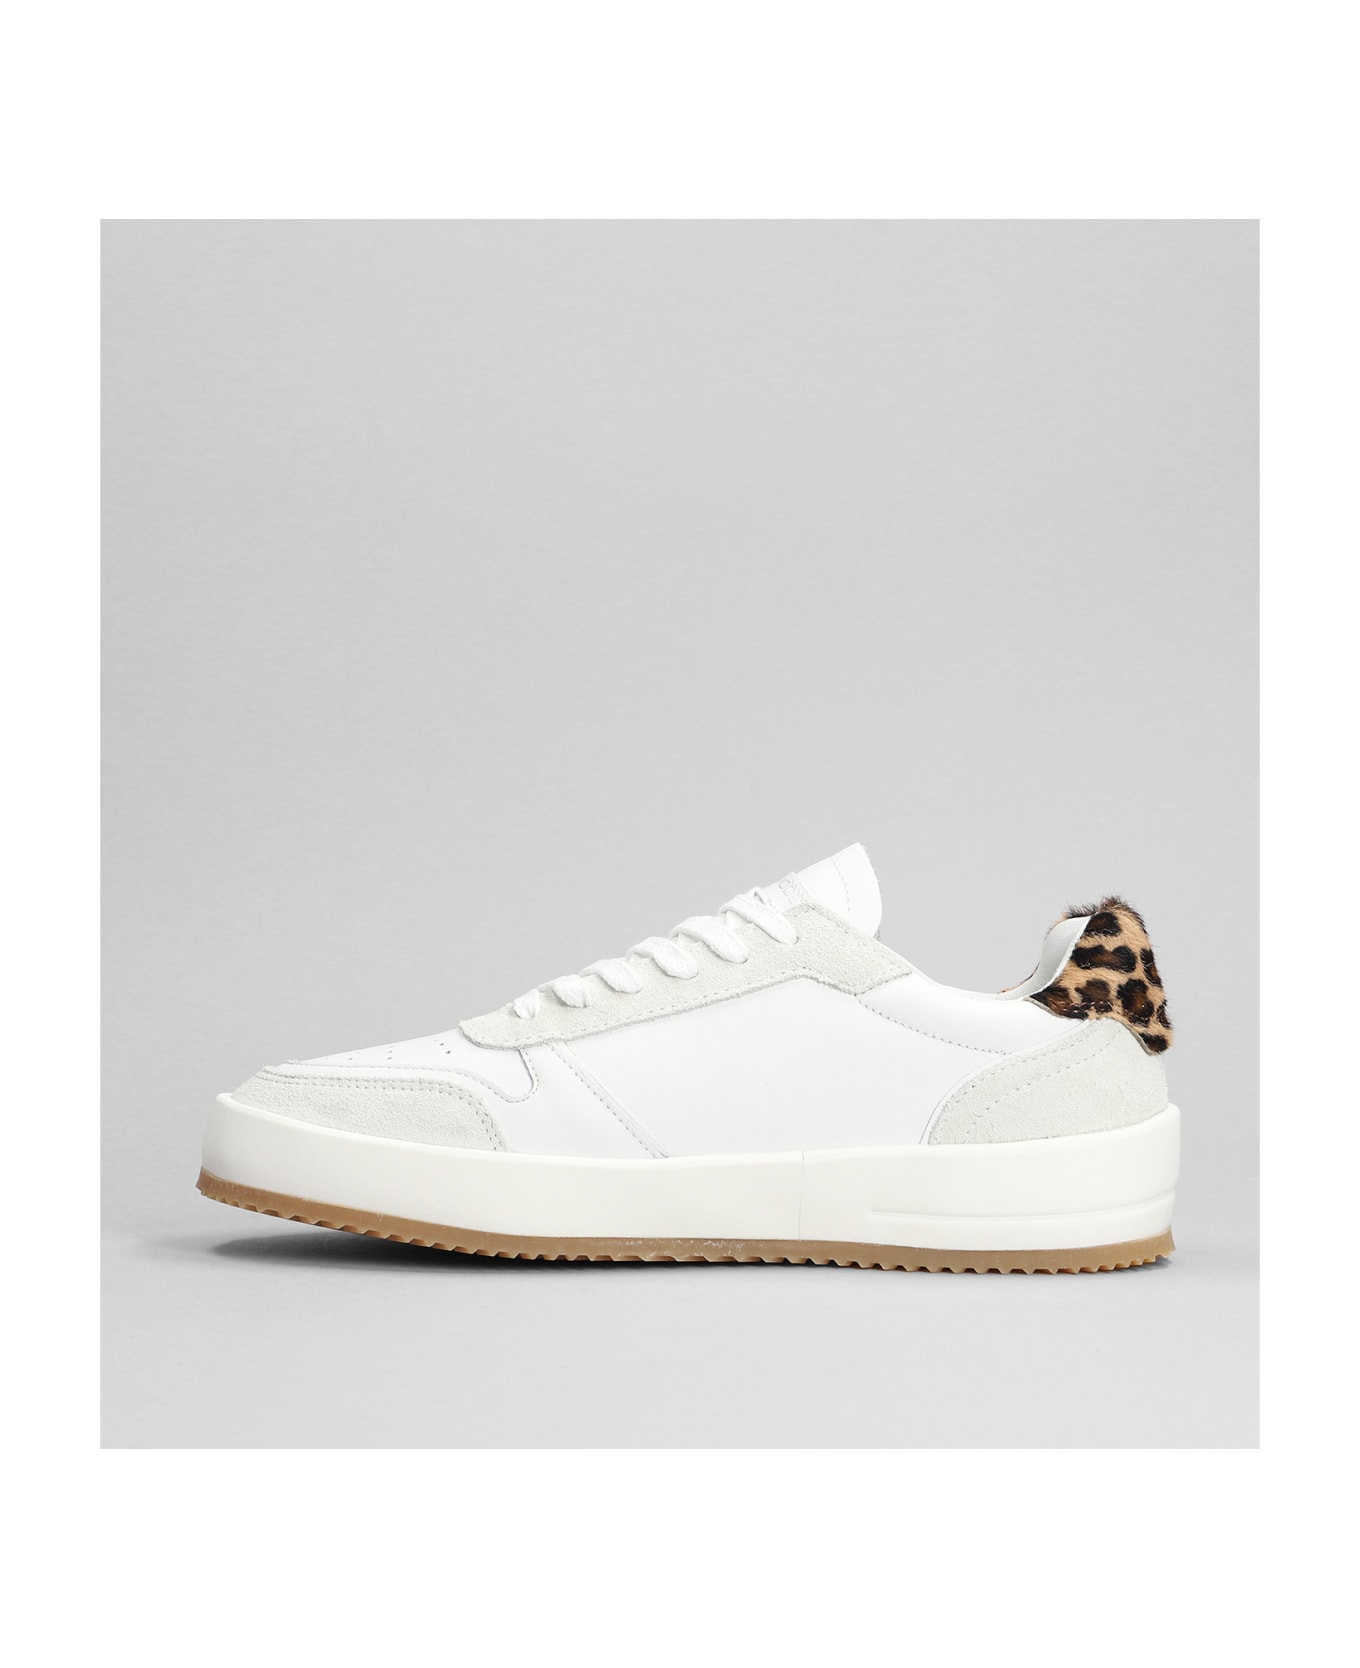 Philippe Model Nice Low Sneakers In White Suede And Leather - white